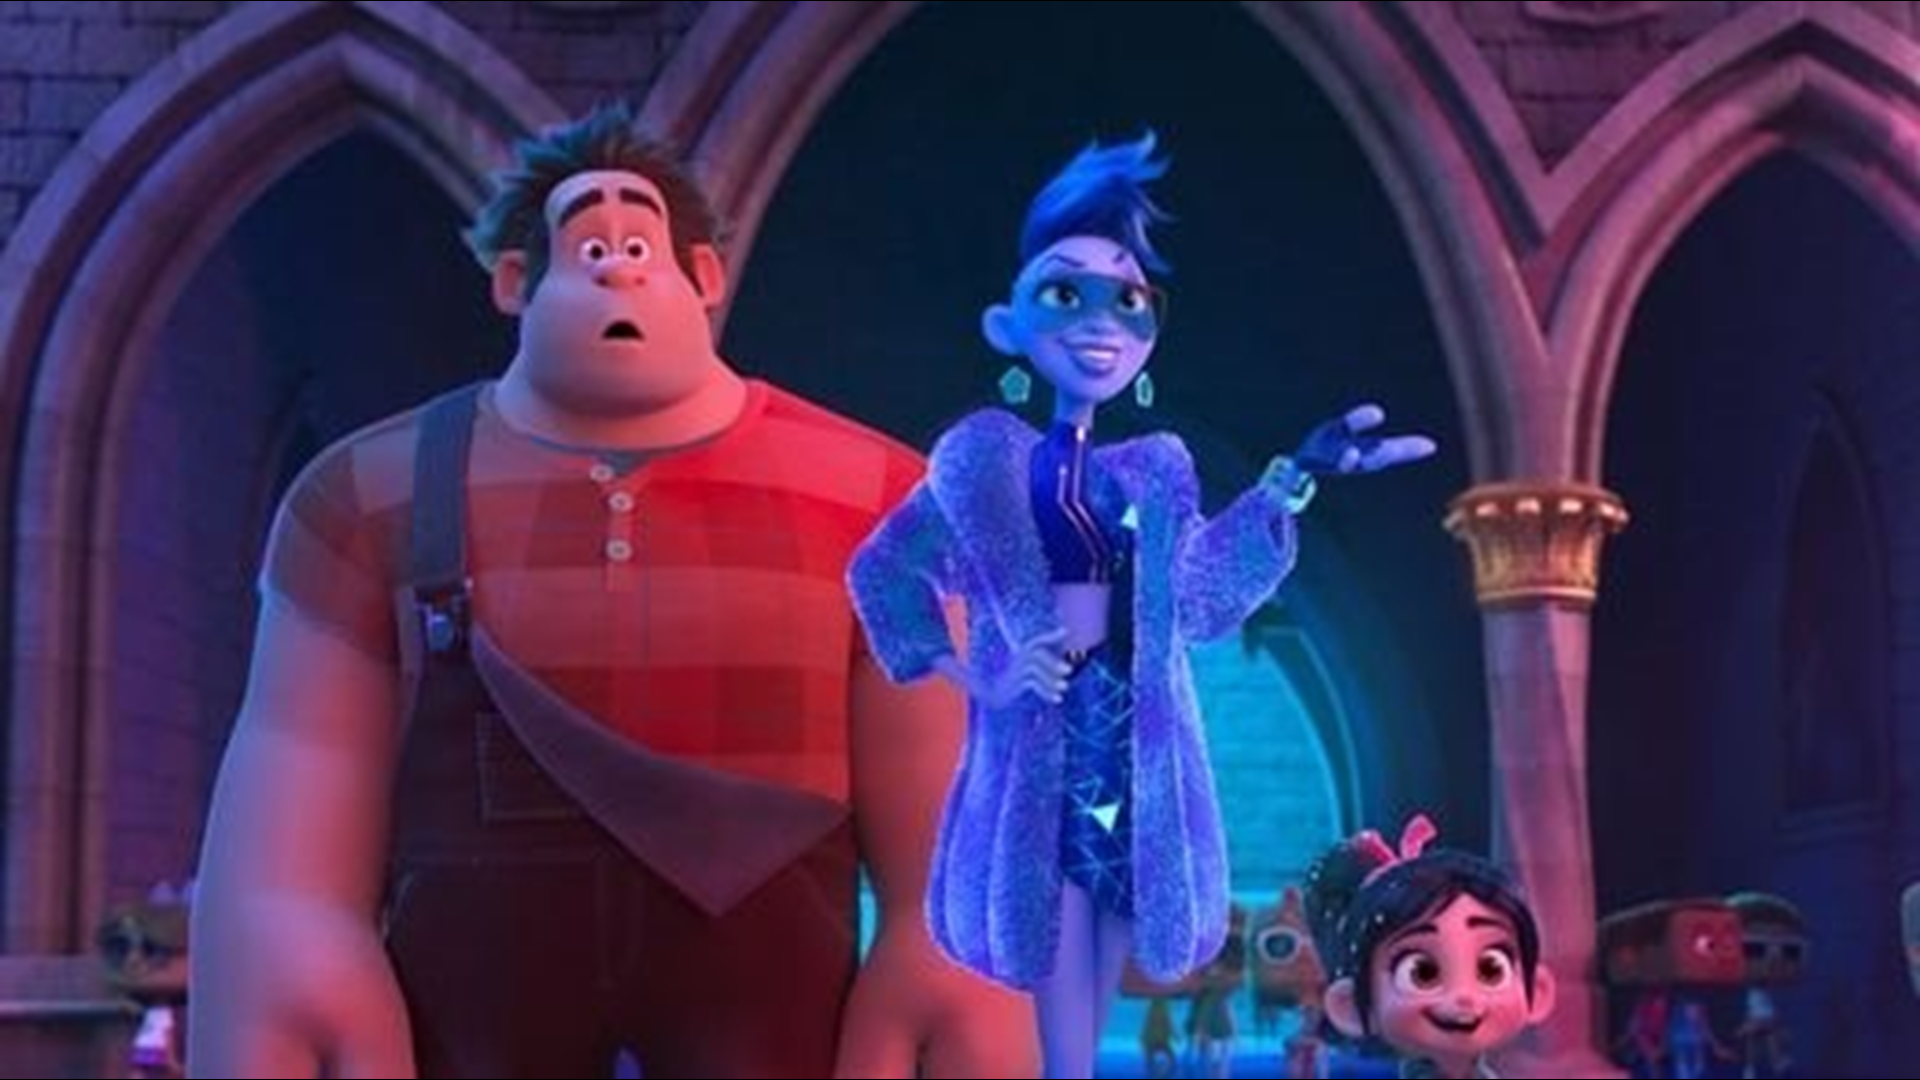 'Ralph Breaks the Internet,' 'The Possession of Hannah Grace,' and more new movies are available to own at home. Here's the latest from the Director's Chair.